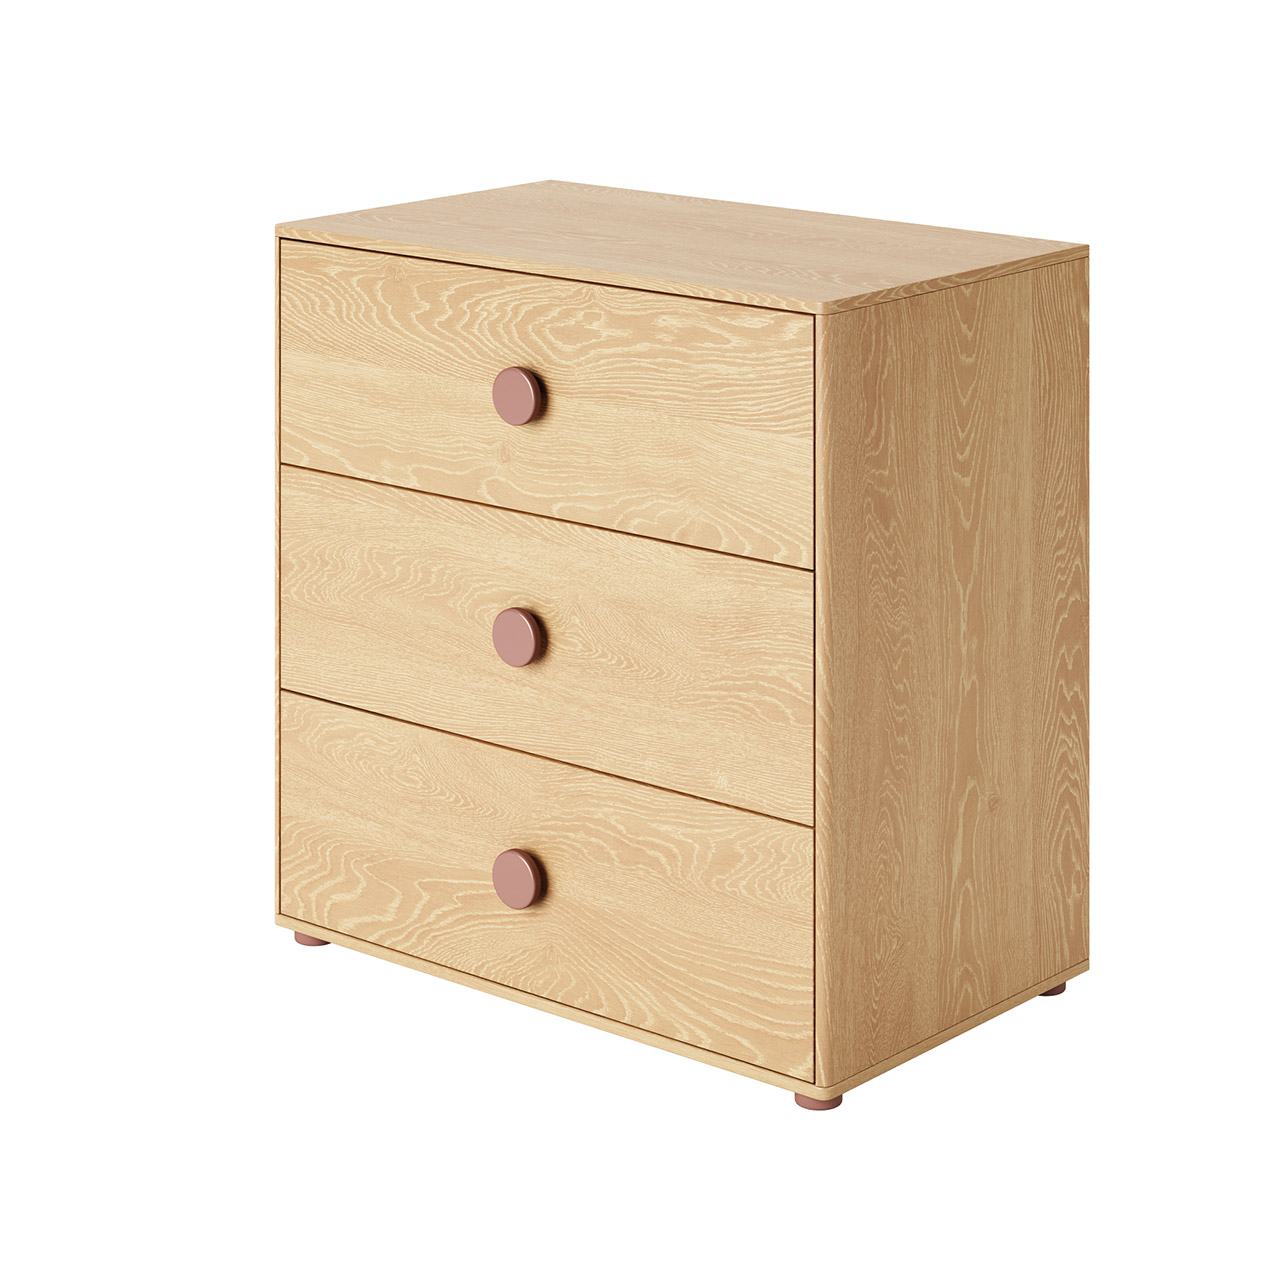 popsicle-chest-with-3-drawers-by-flexa.jpg